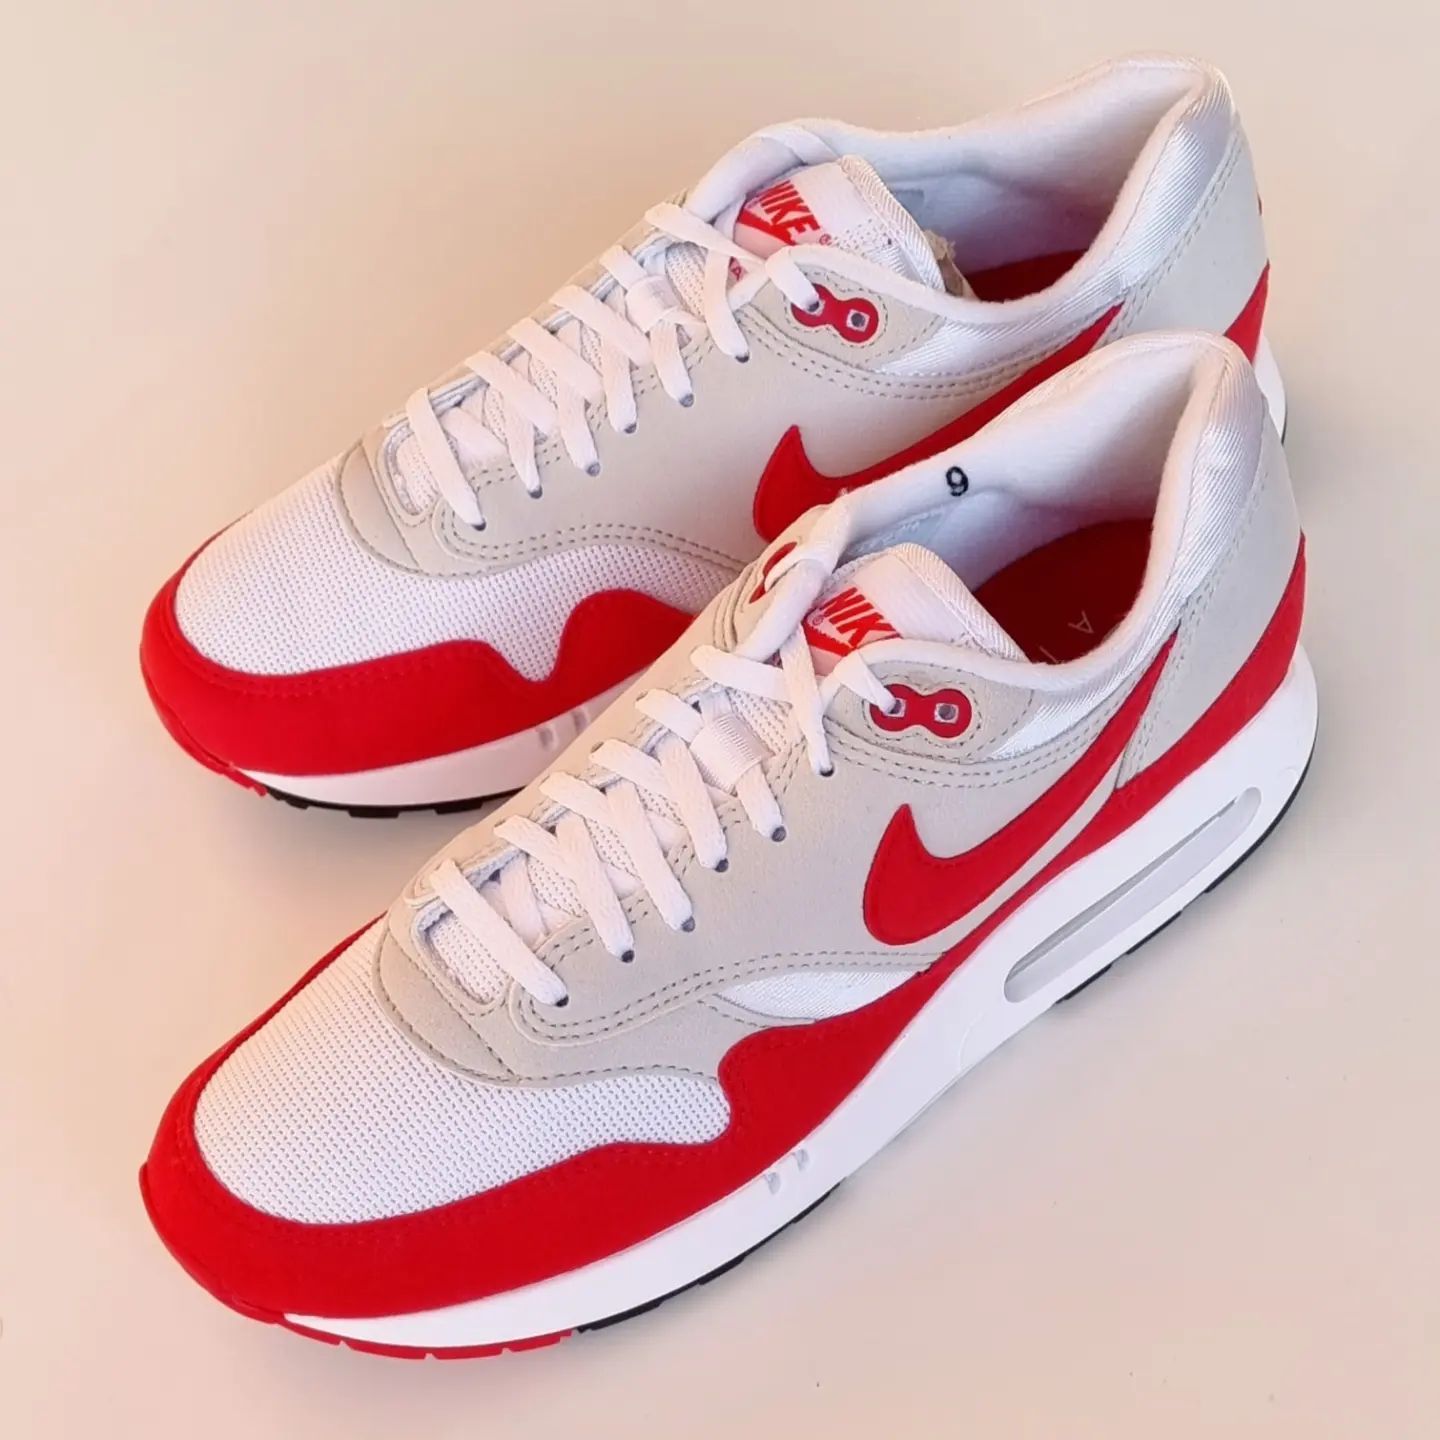 First Look at the New Nike Air Max 1 '86 Big Bubble - TheSiteSupply